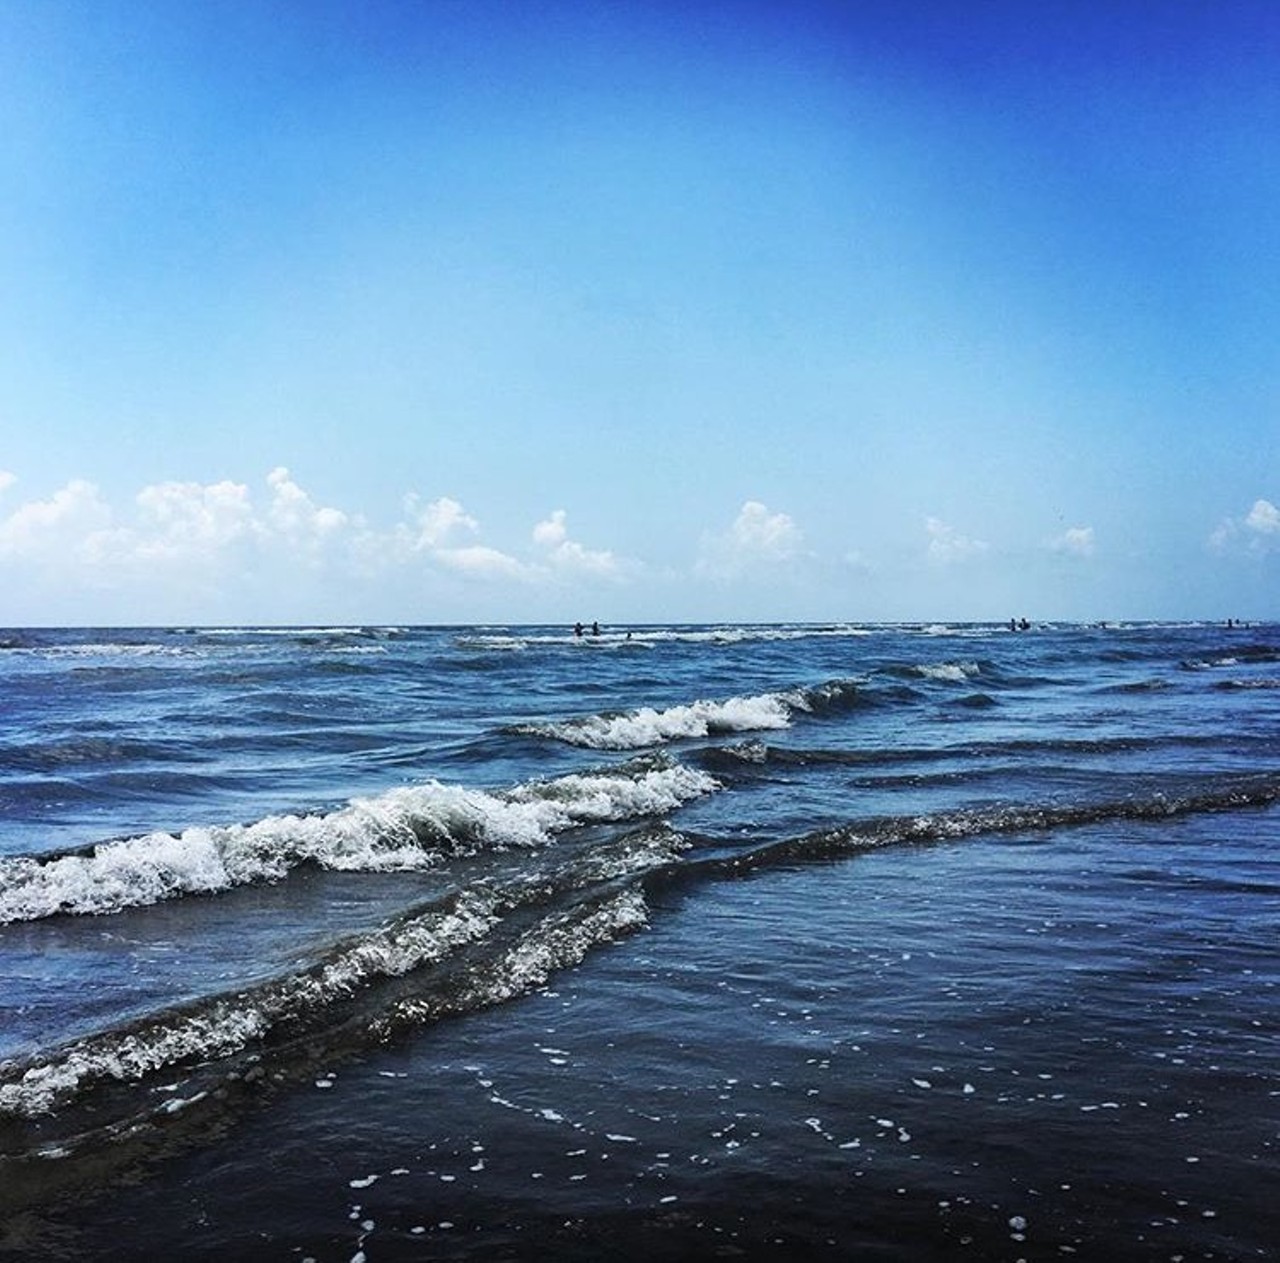 Jamaica Beach
Galveston Island, ci.jamaicabeach.tx
Despite its name, this tiny town can be found about a half mile south of Galveston. While the beaches of the area manages to avoid the hustle and bustle of the seaside city, its clean sand and quiet atmosphere attract locals and those lucky enough to be in-the-know. 
Photo via Instagram / anutbond